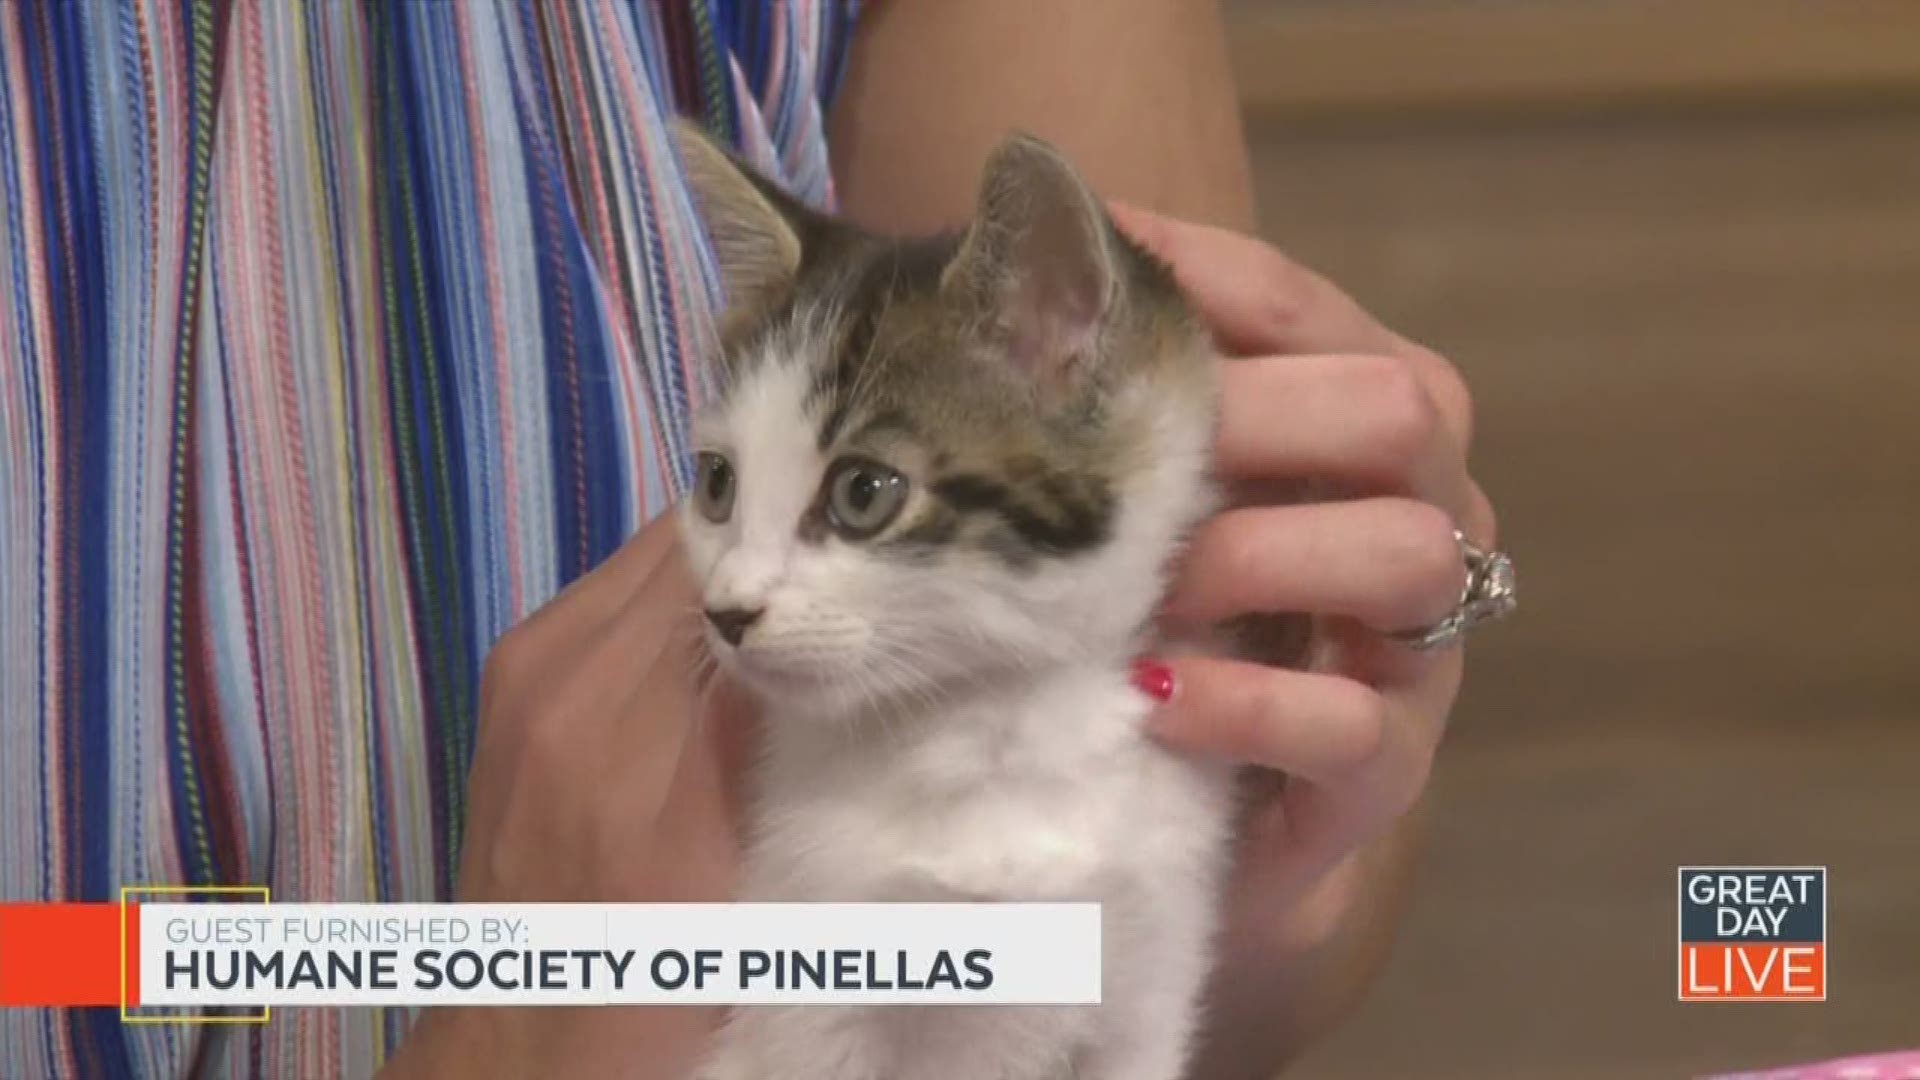 Go to humanesocietyofpinellas.org for more information on Percy and the kitten crusader program.